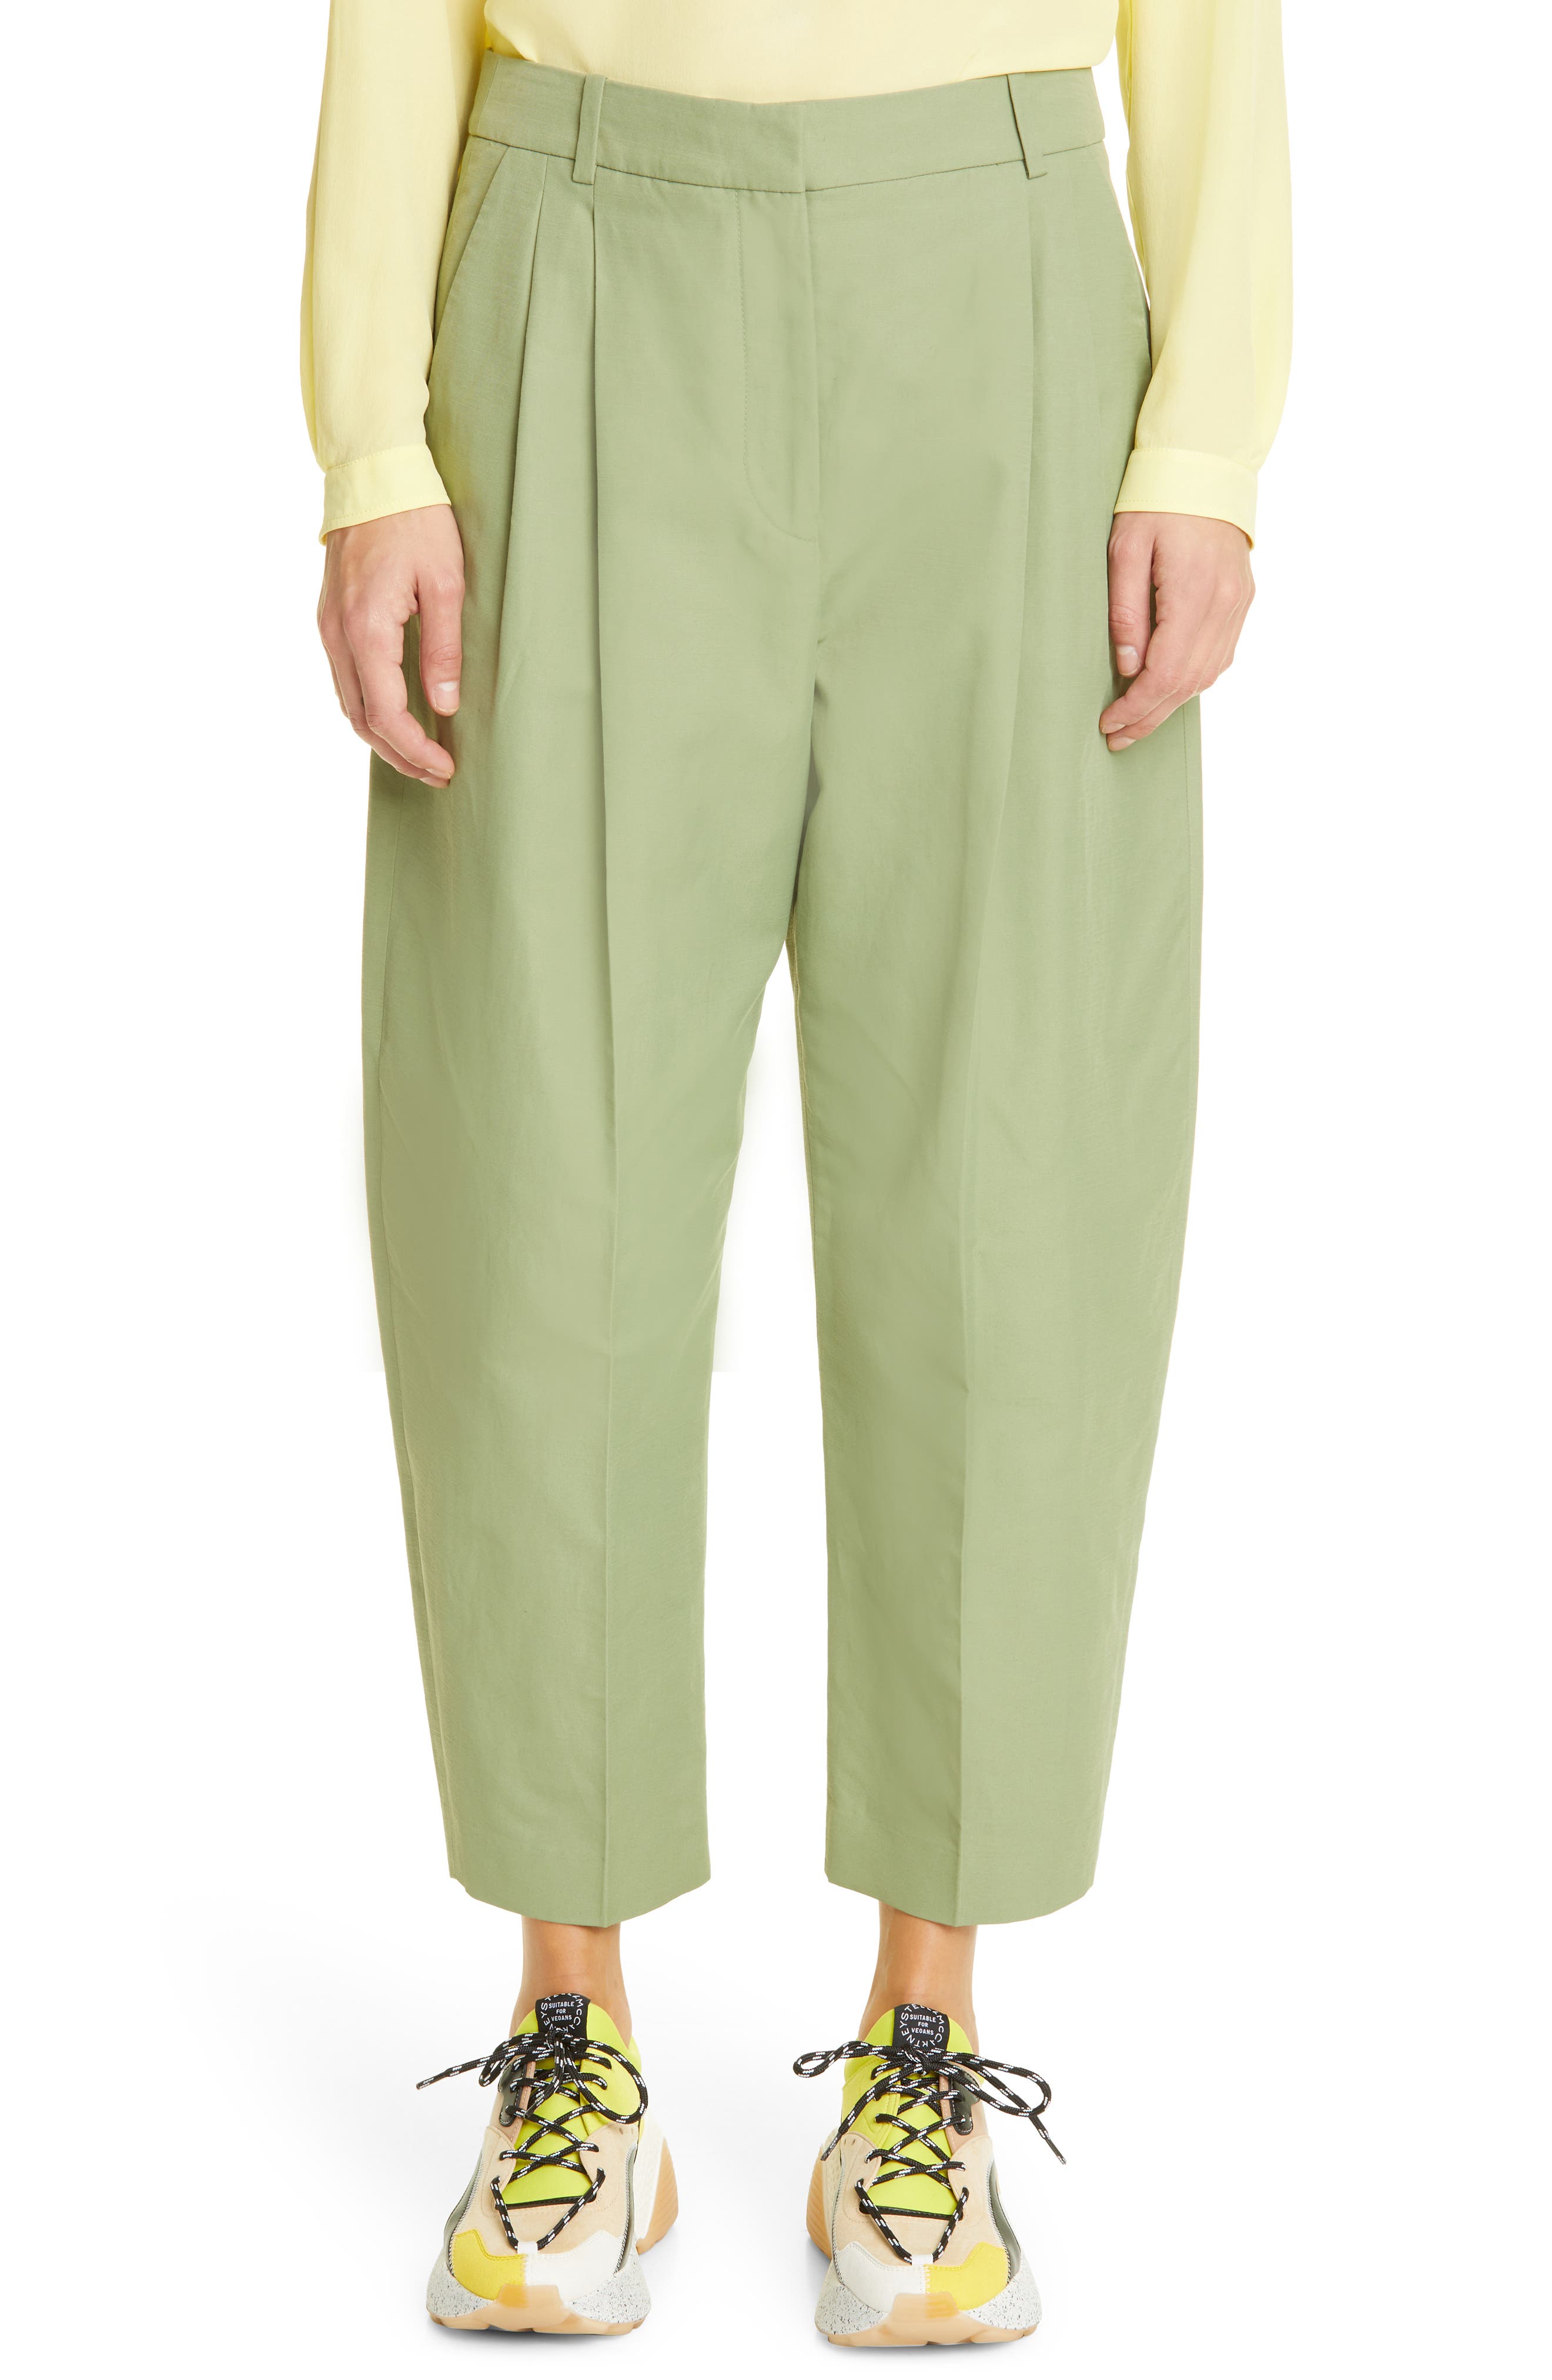 Stella McCartney Pleated Ankle Pants in 1602 Sage at Nordstrom, Size 4 Us